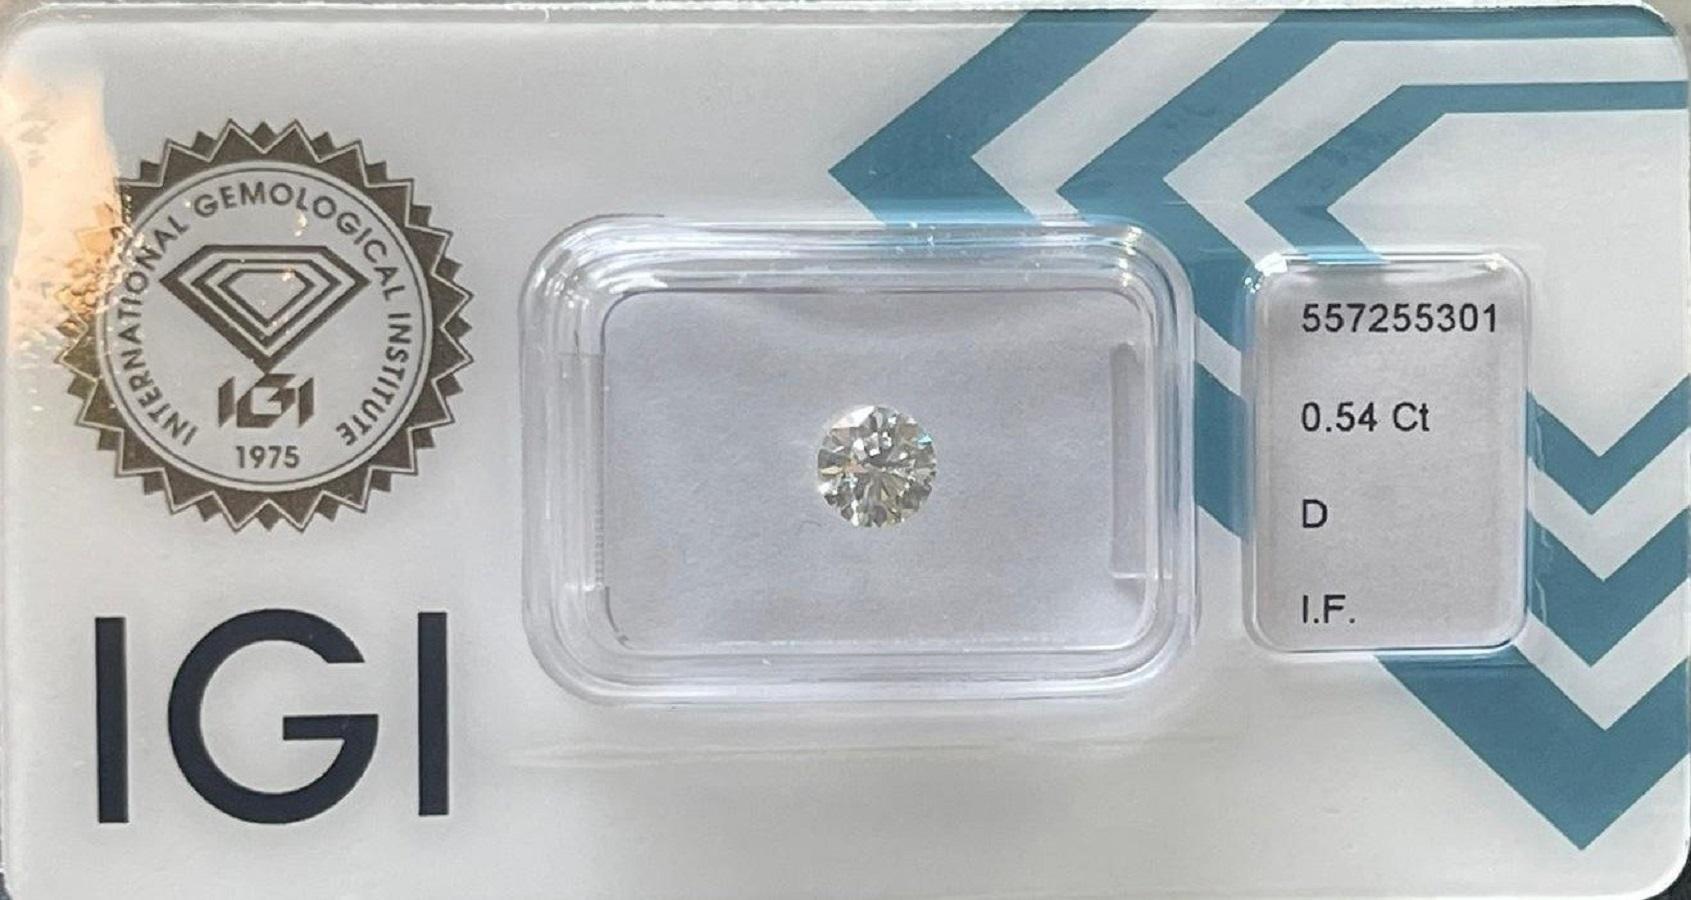 Sparkling 2pcs Flawless Natural Diamonds with 1.07ct Round D IF IGI Certificate 2